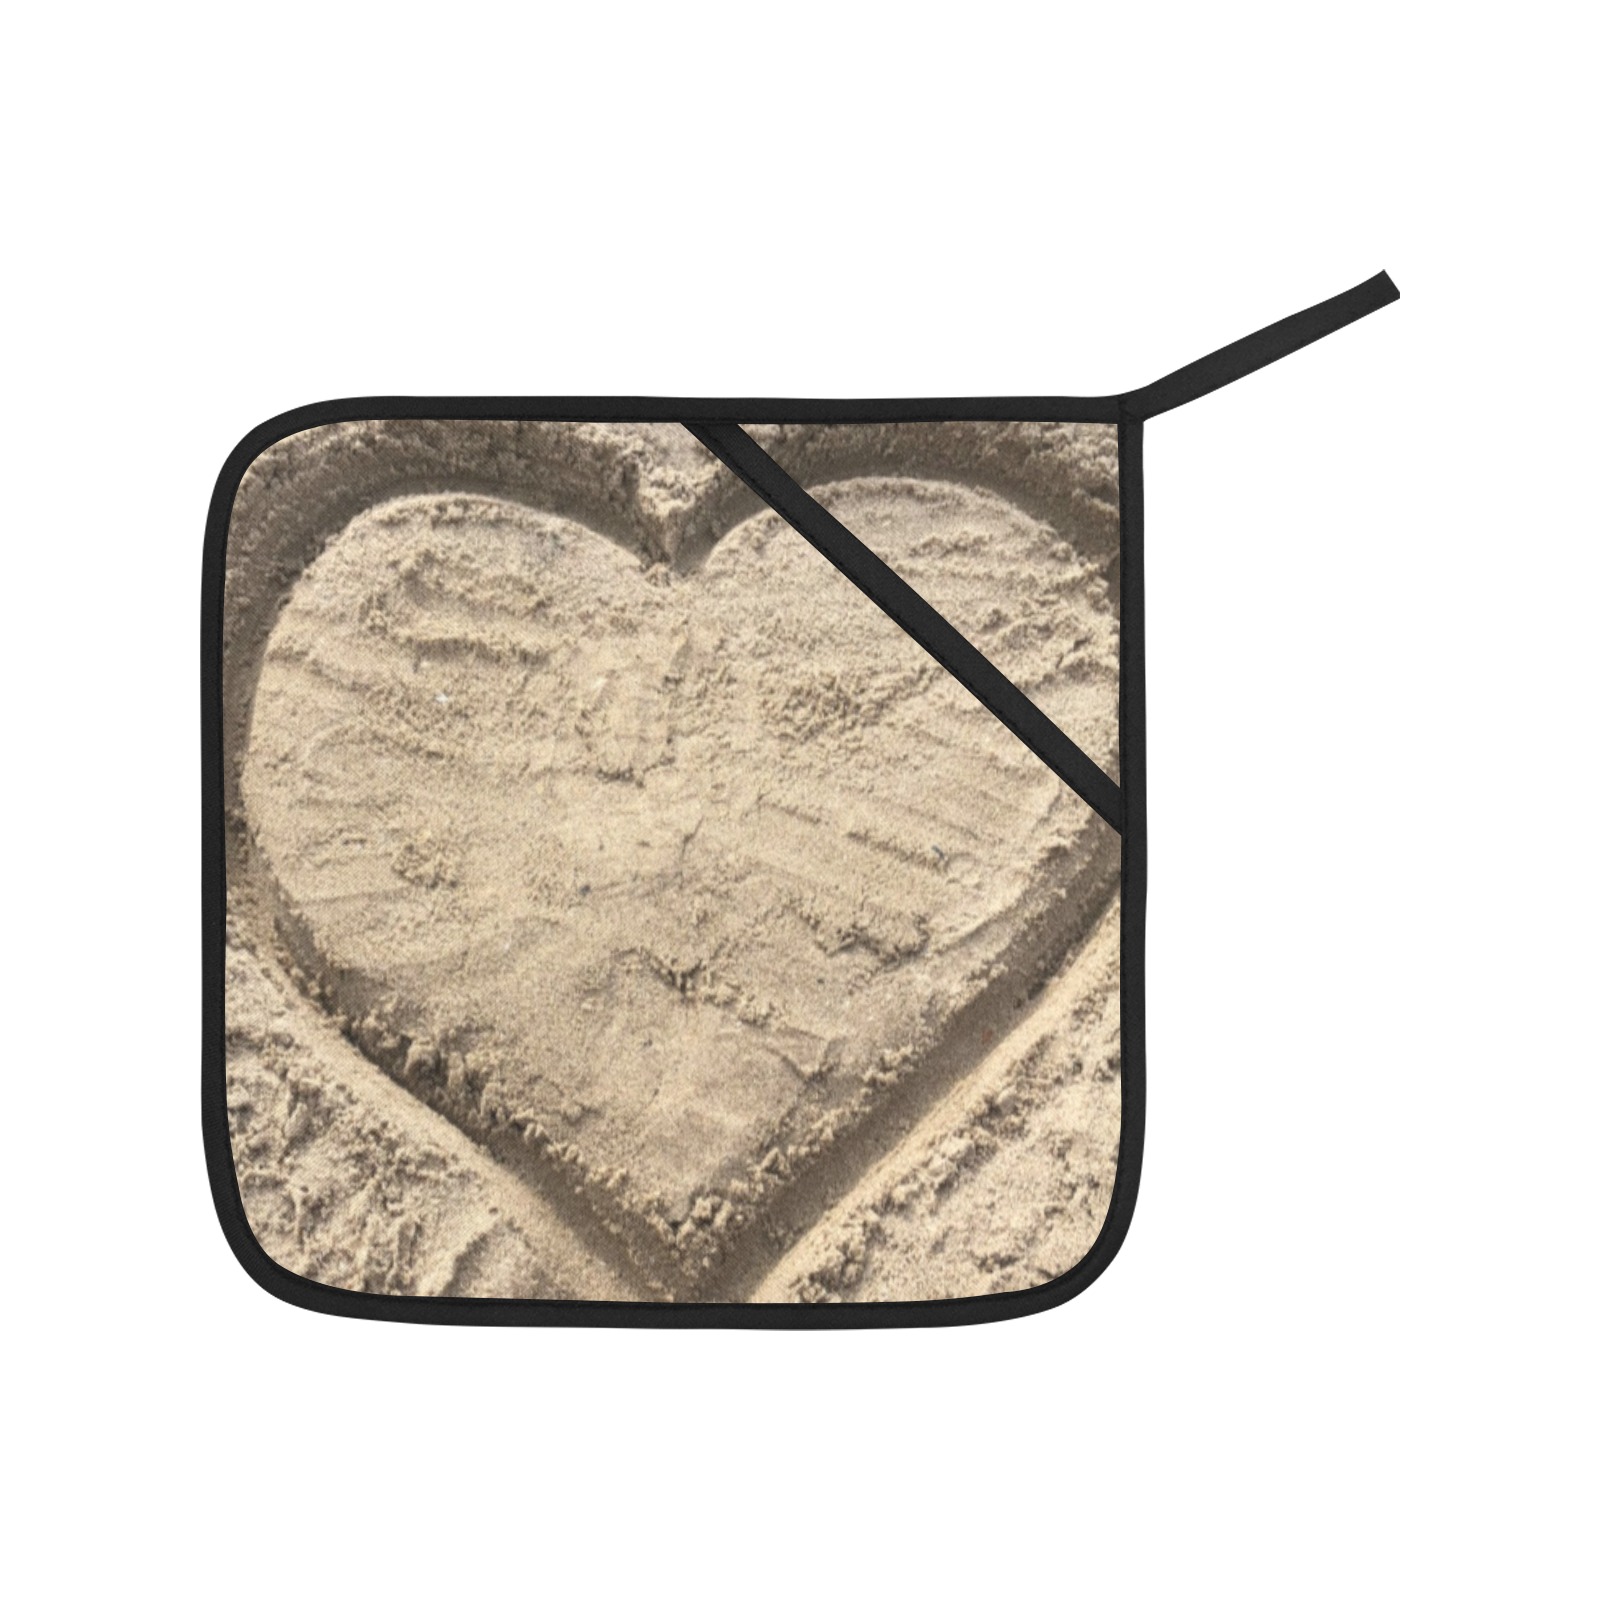 Love in the Sand Collection Oven Mitt & Pot Holder